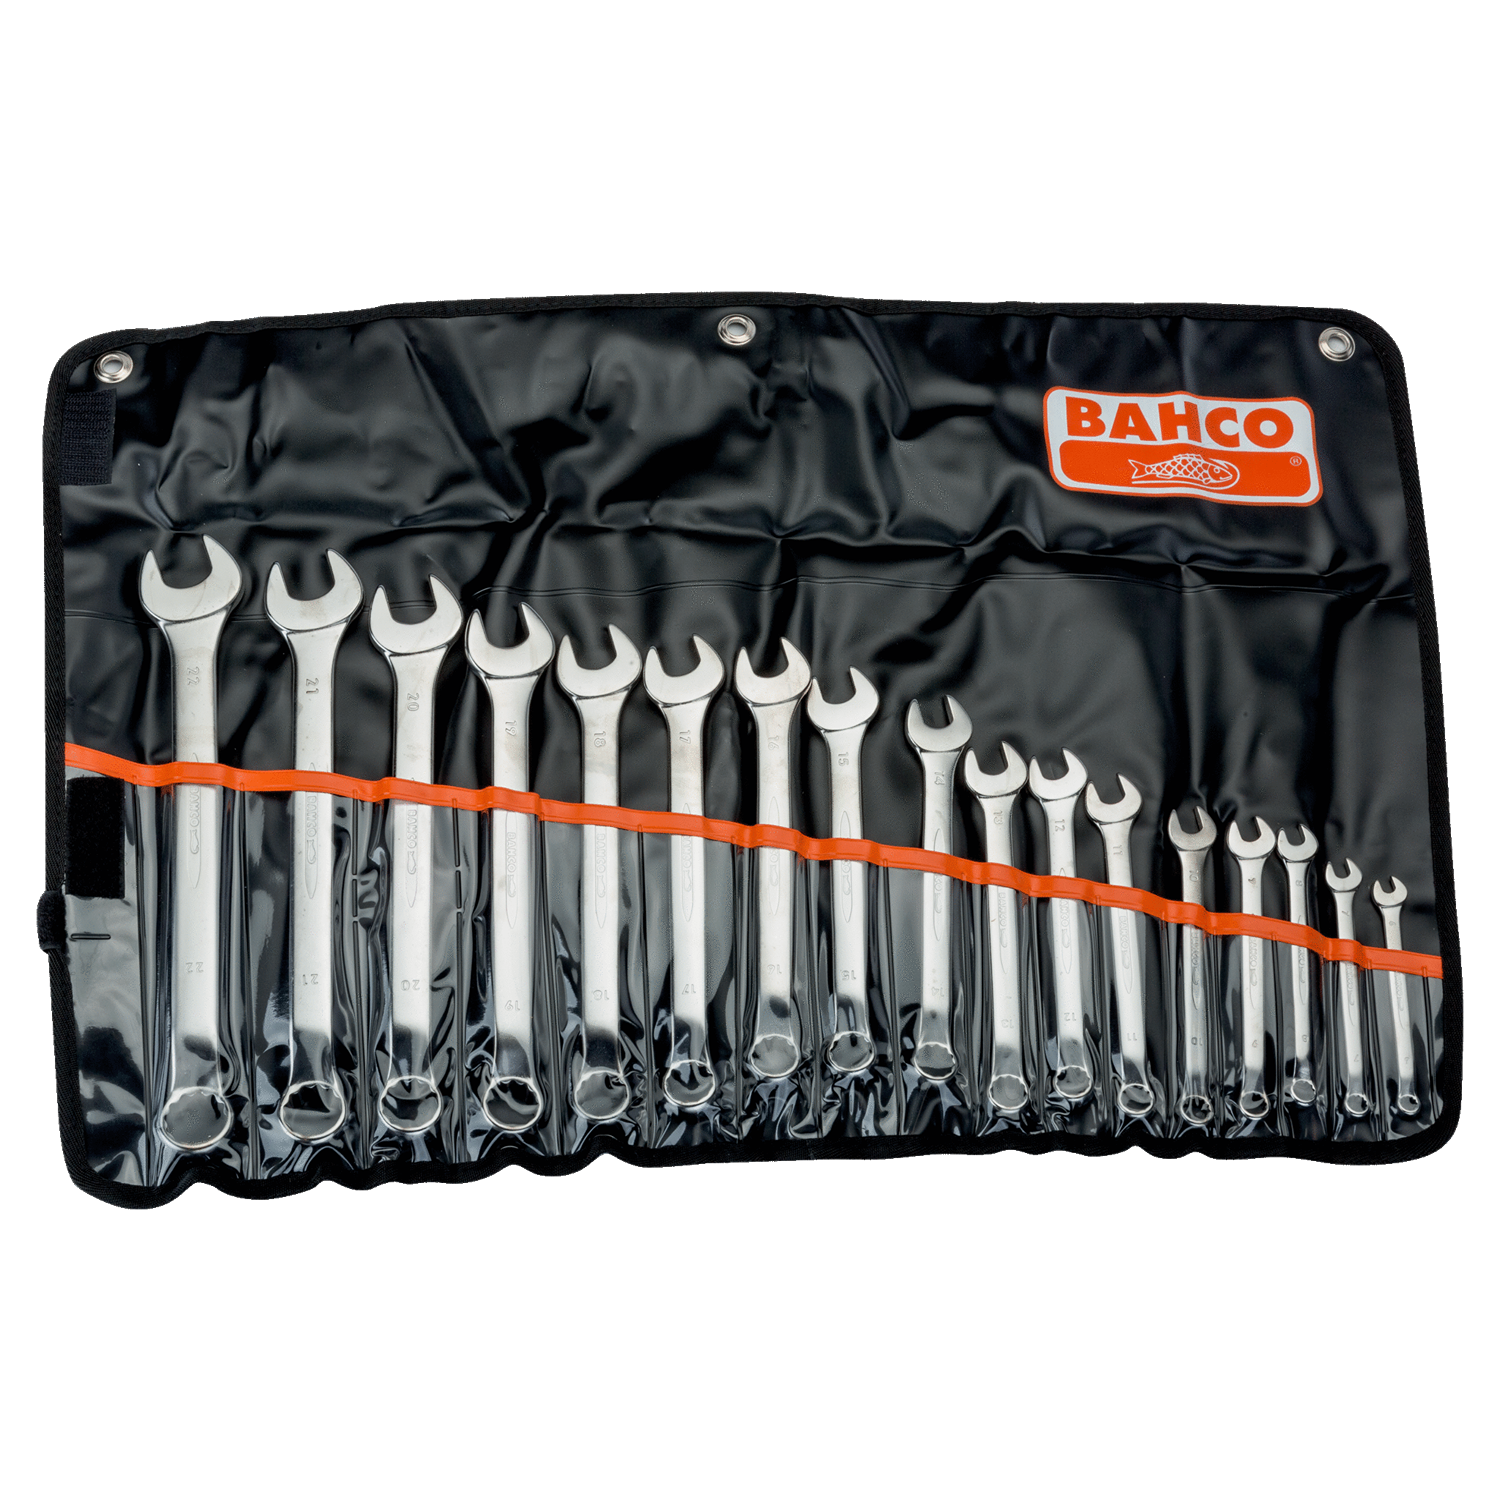 BAHCO 1952M/17T Metric Offset Combination Wrench Set-17 Pcs/Pouch - Premium Combination Wrench from BAHCO - Shop now at Yew Aik.